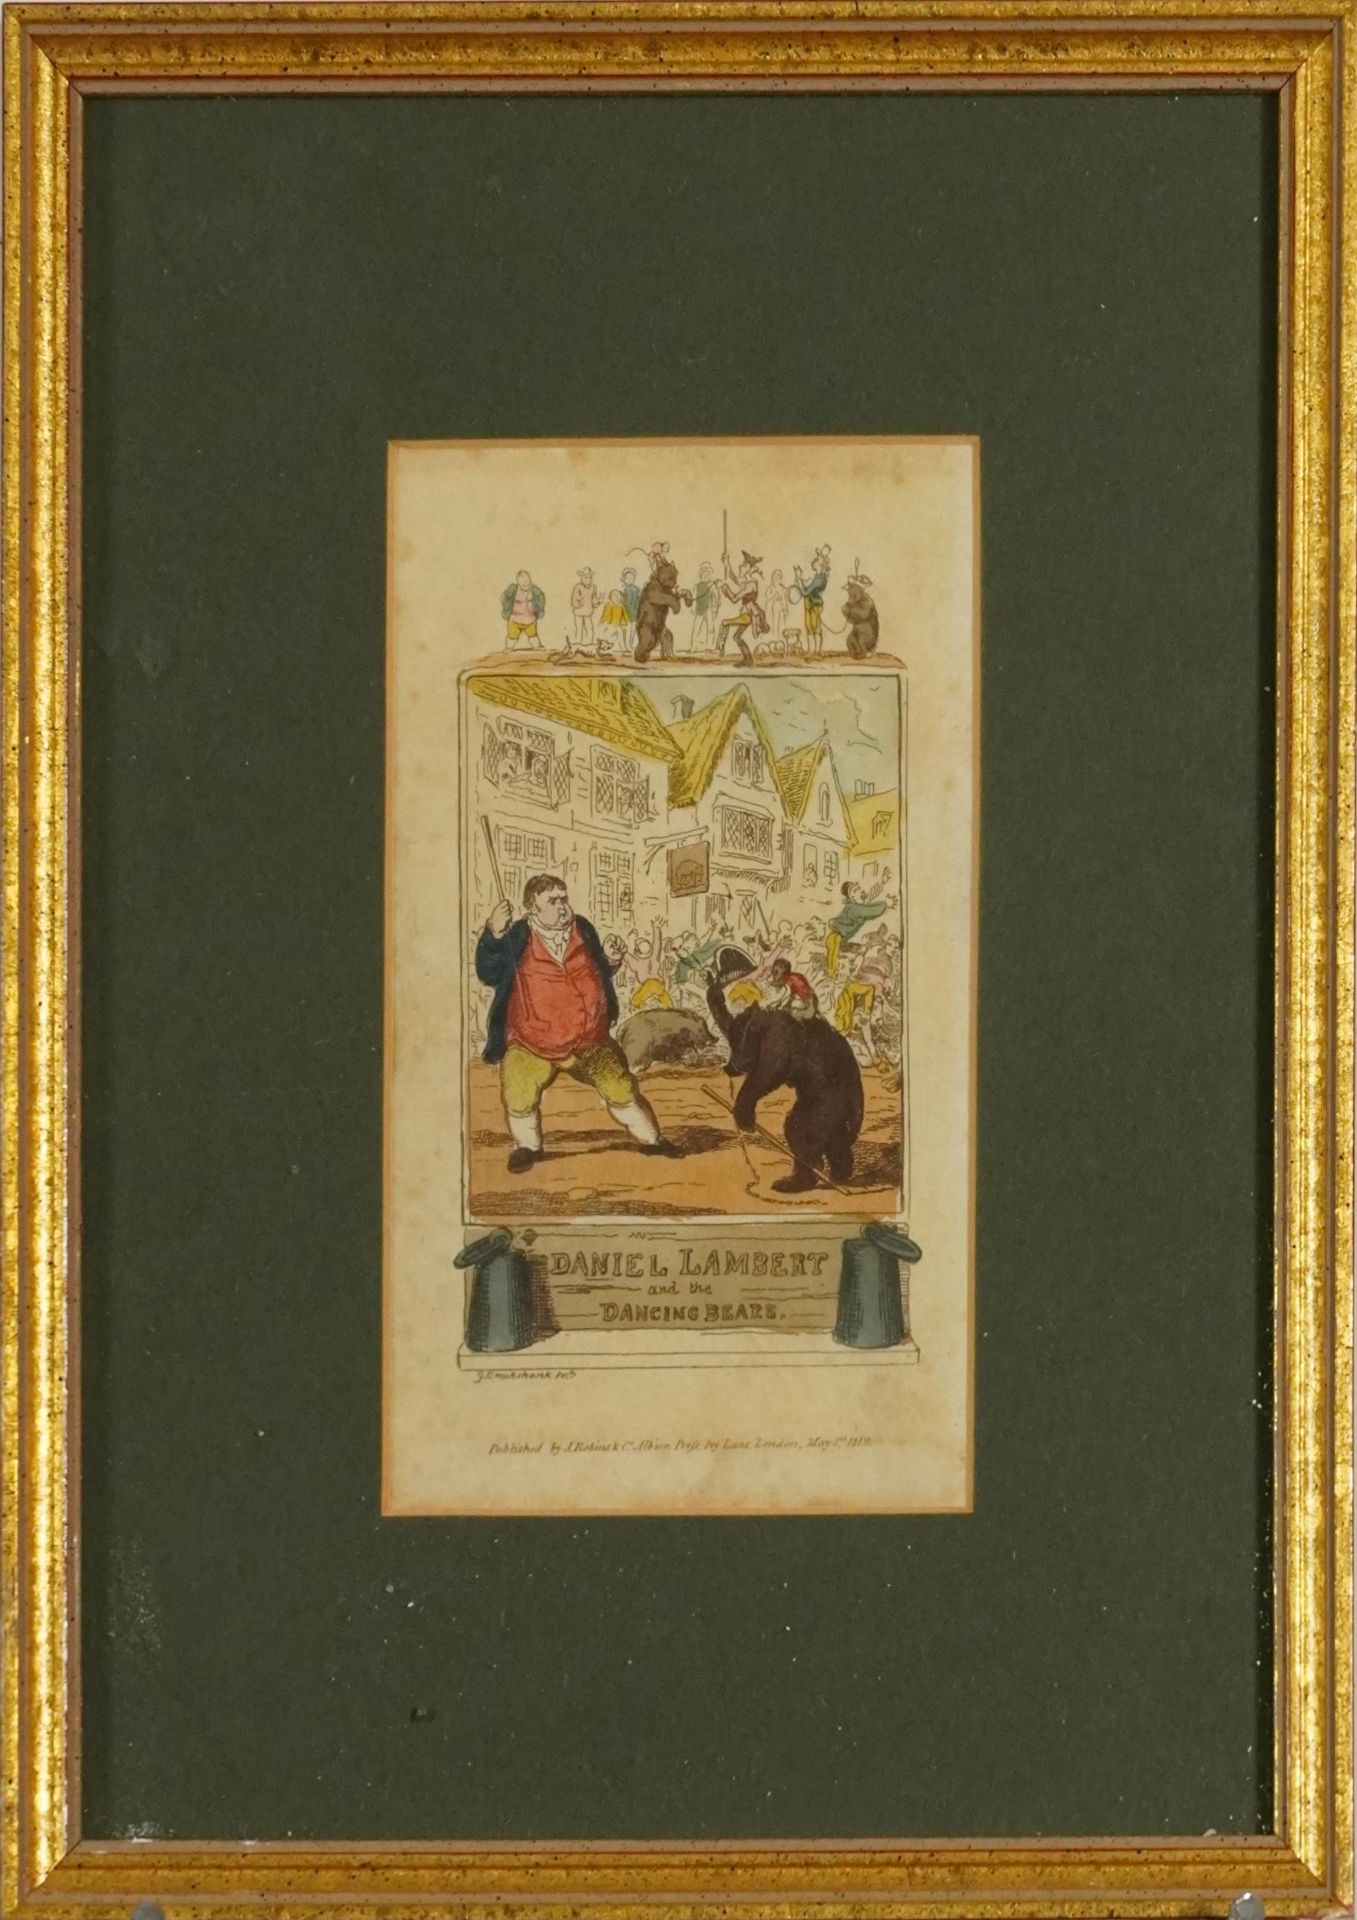 After G Cruikshank - Daniel Lambert and the Dancing Bears and Cook the Actor, pair of early 19th - Image 3 of 9